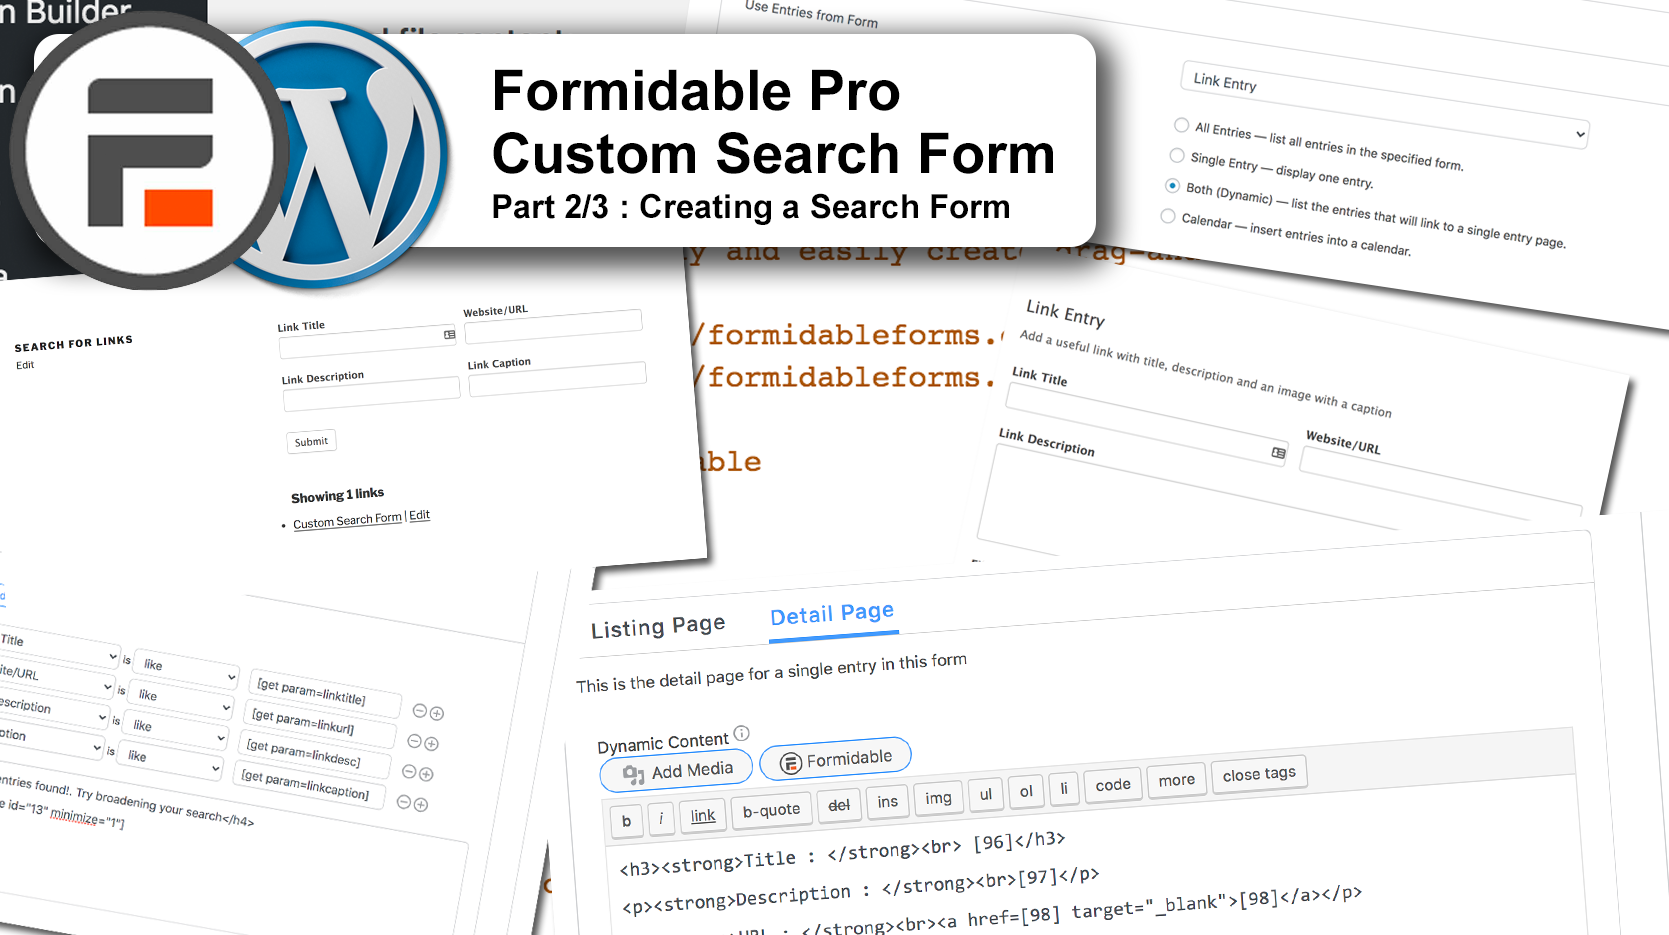 Formidable Pro Custom Search Form part 2